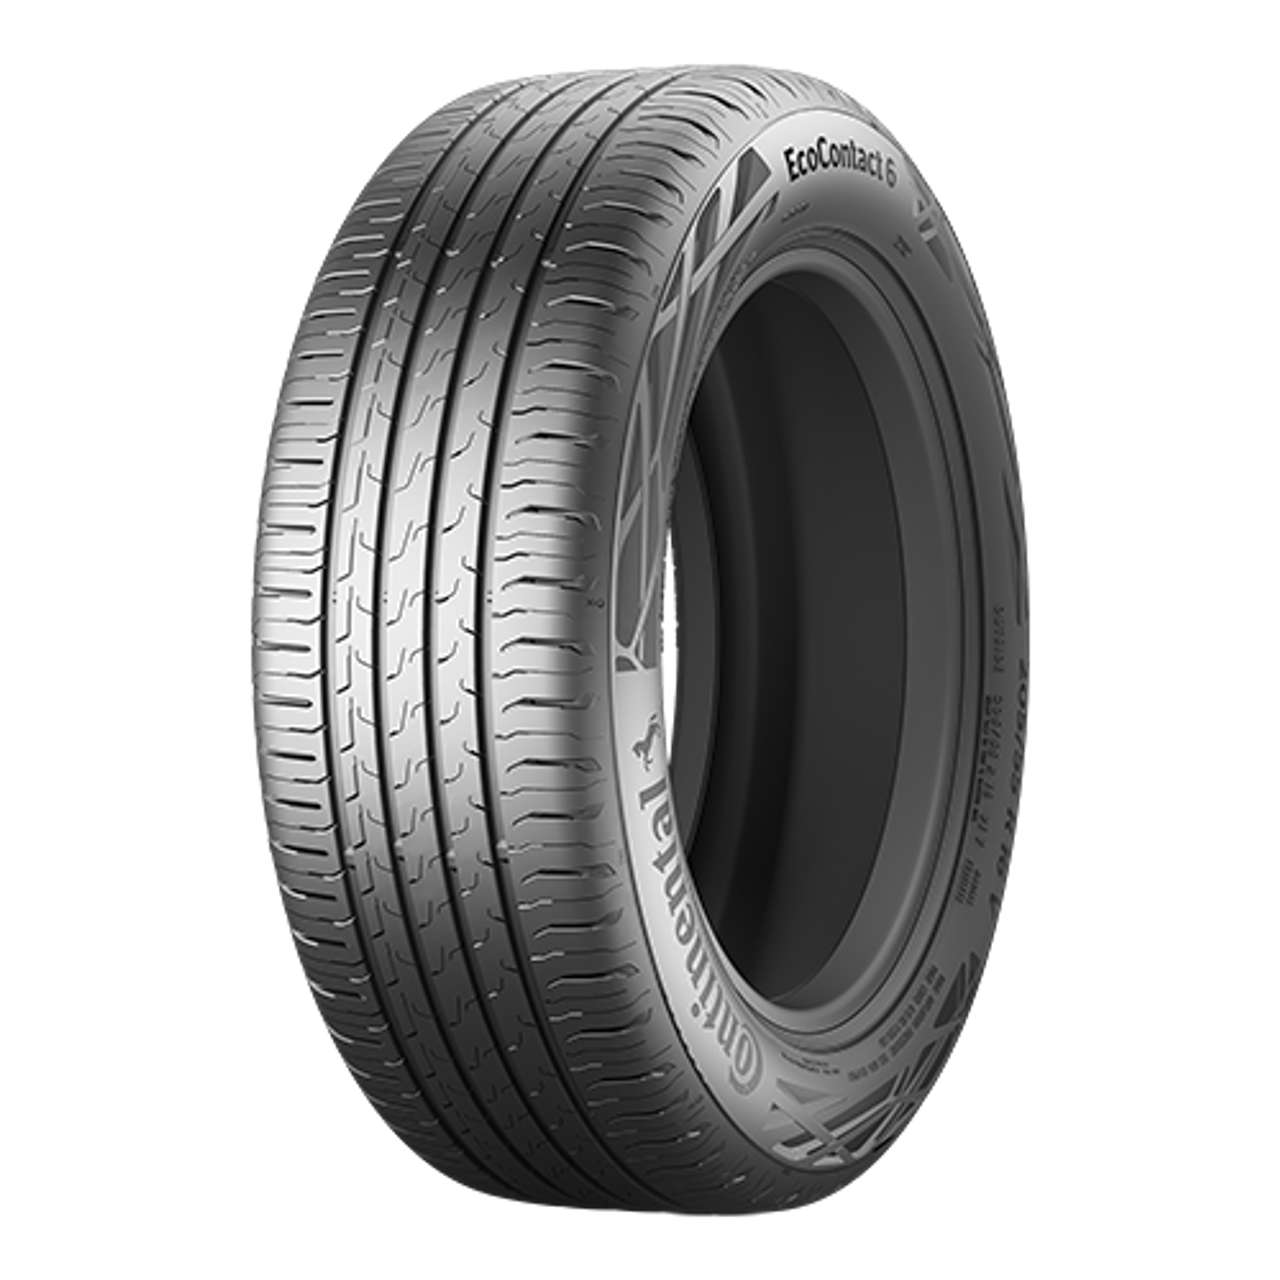 CONTINENTAL ECOCONTACT 6 (EVc) 265/45R21 108V BSW XL